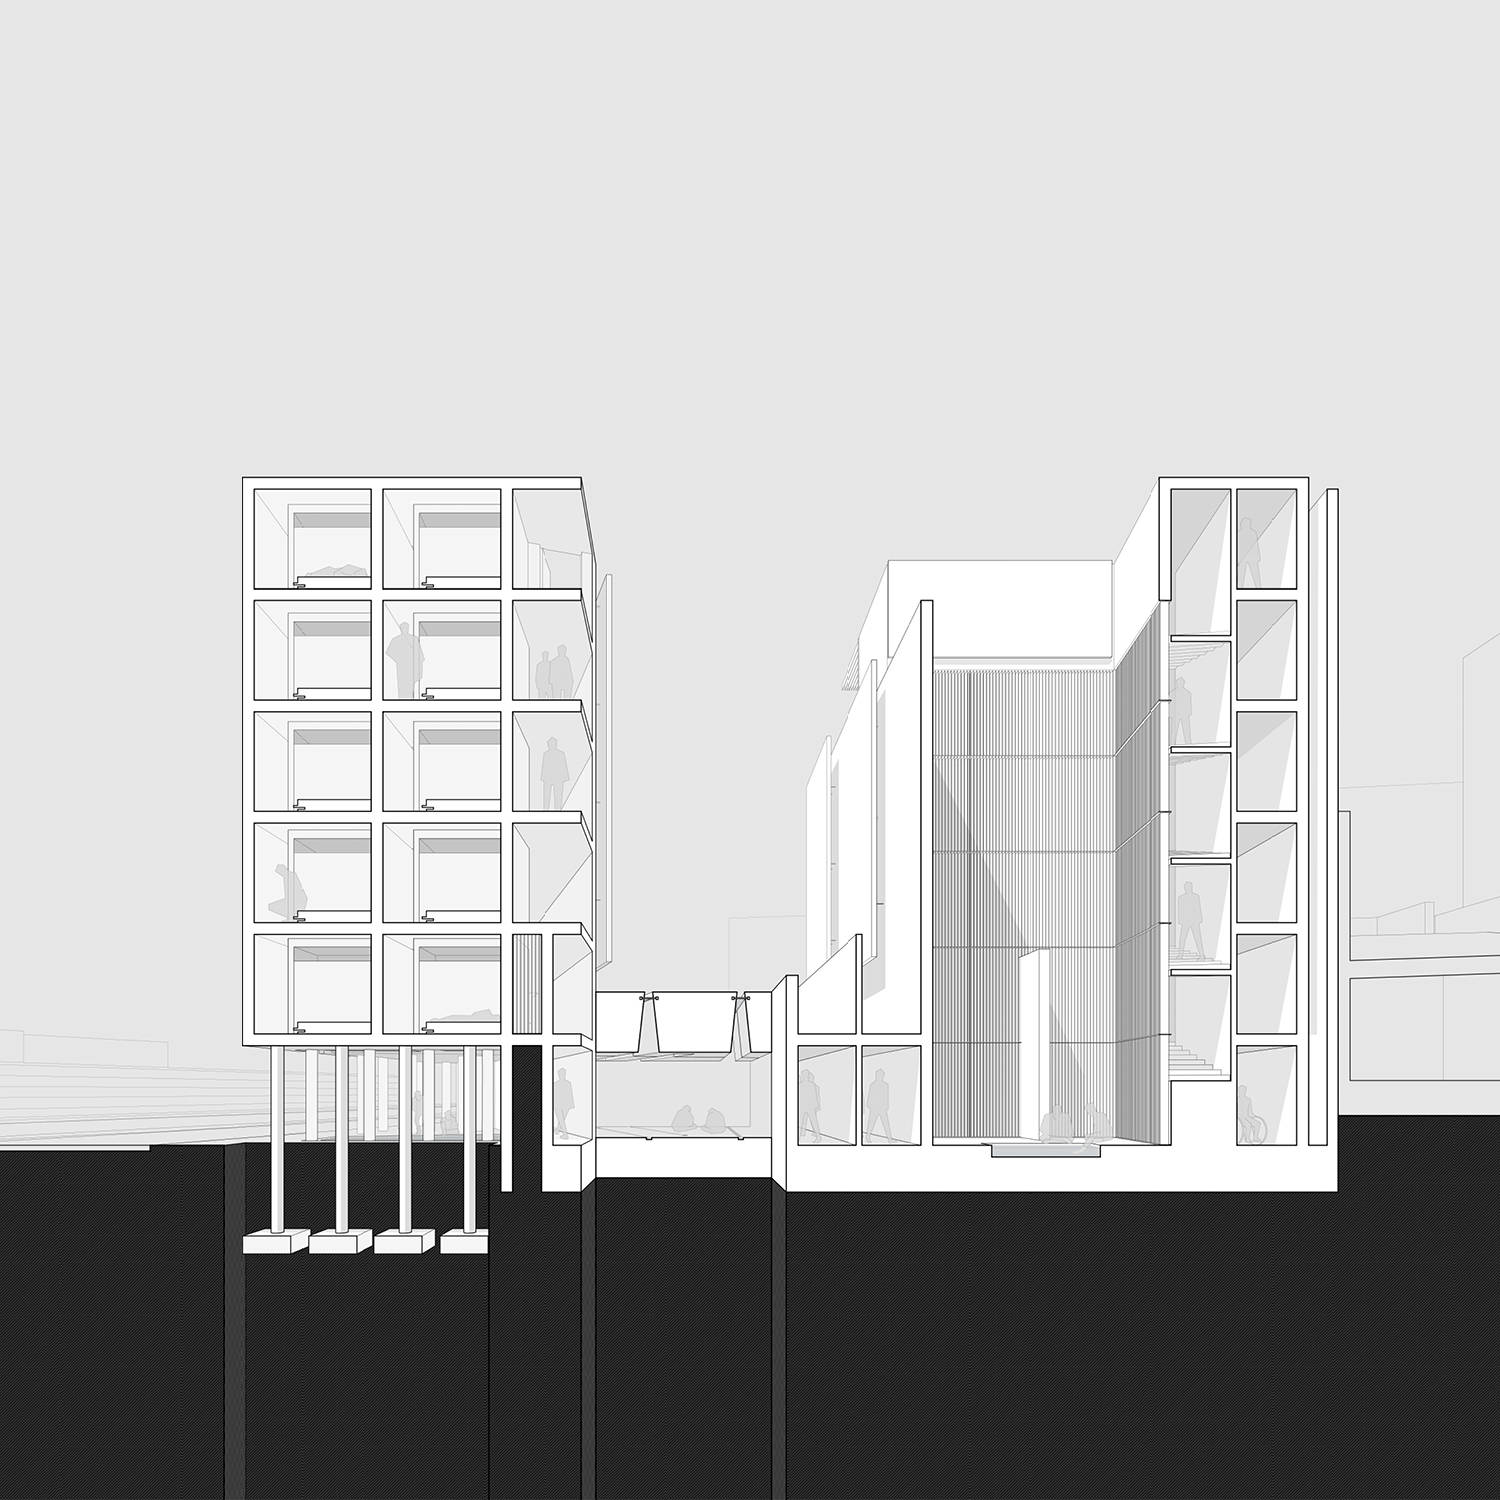 CAD drawing of multi-story building.